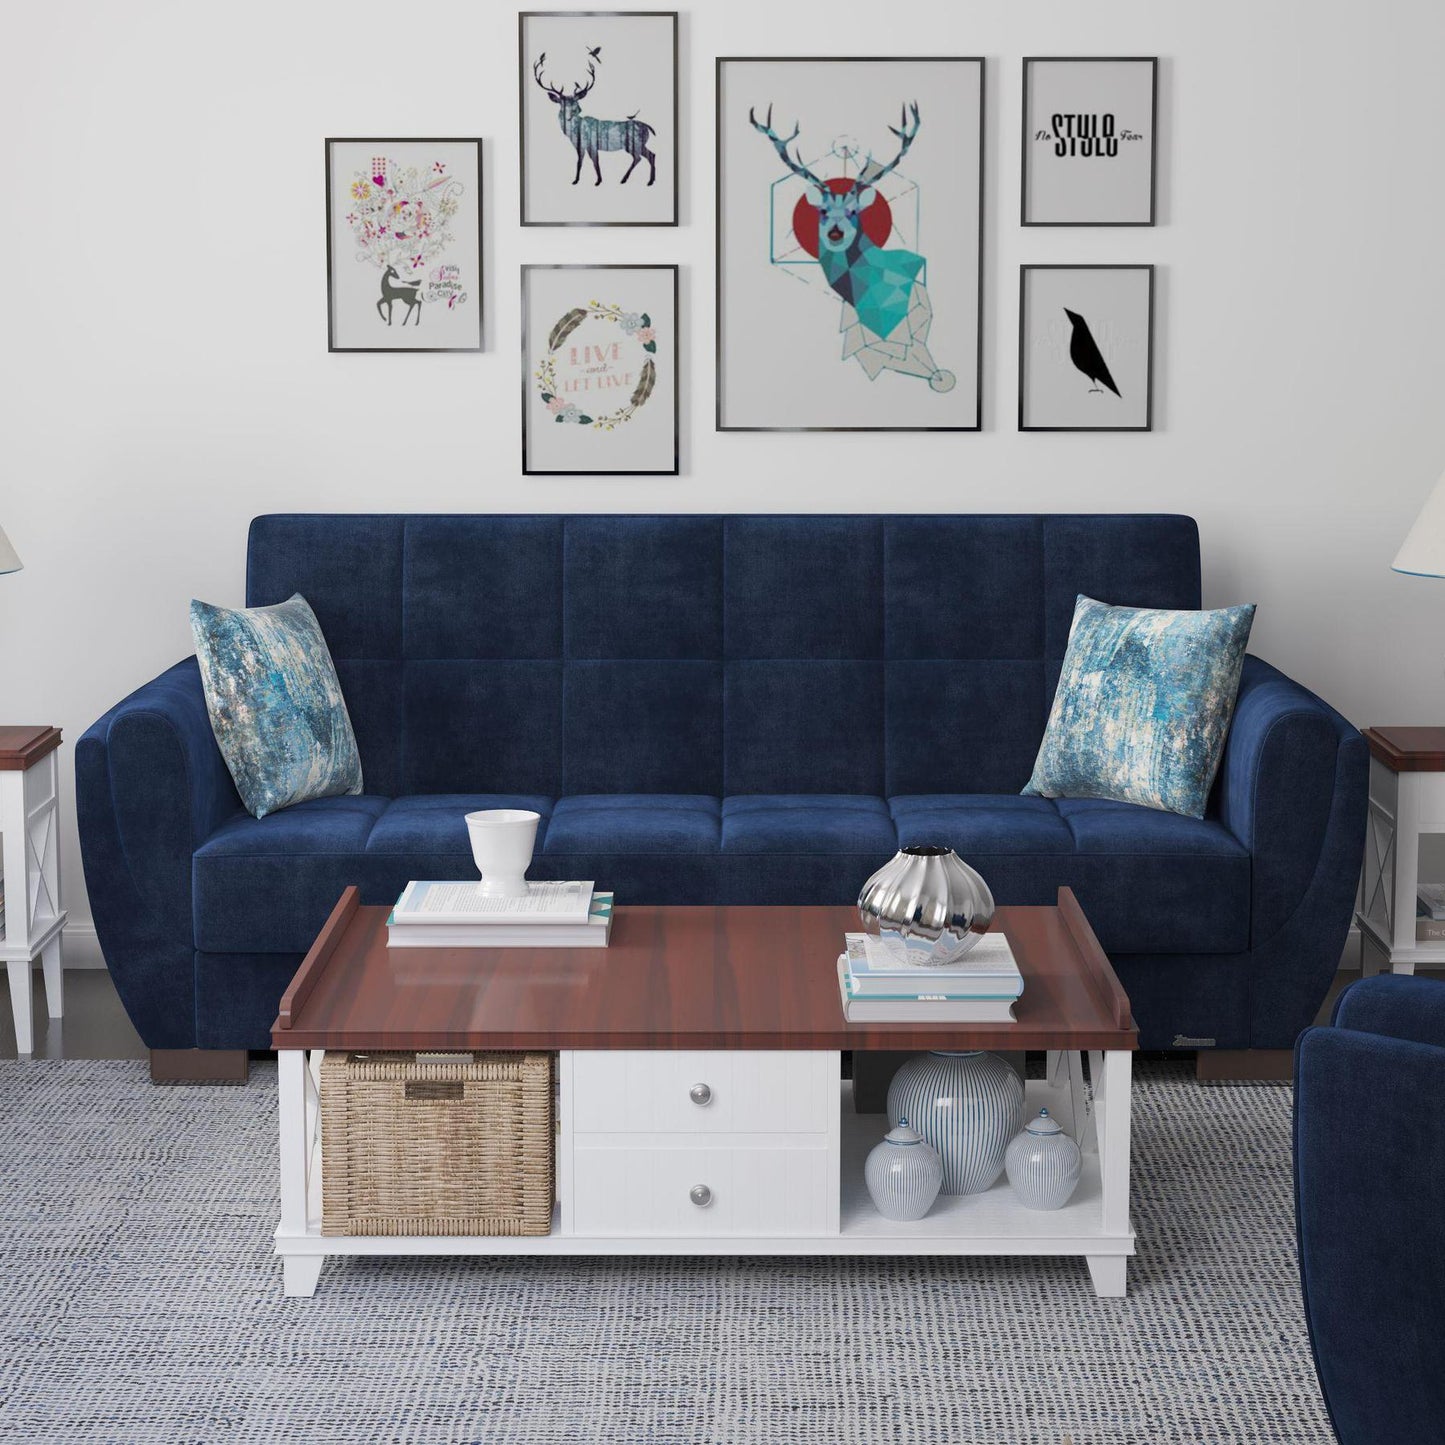 Modern design, True Blue , Microfiber upholstered convertible sleeper Sofabed with underseat storage from Voyage Shelter by Ottomanson in living room lifestyle setting by itself. This Sofabed measures 94 inches width by 36 inches depth by 41 inches height.